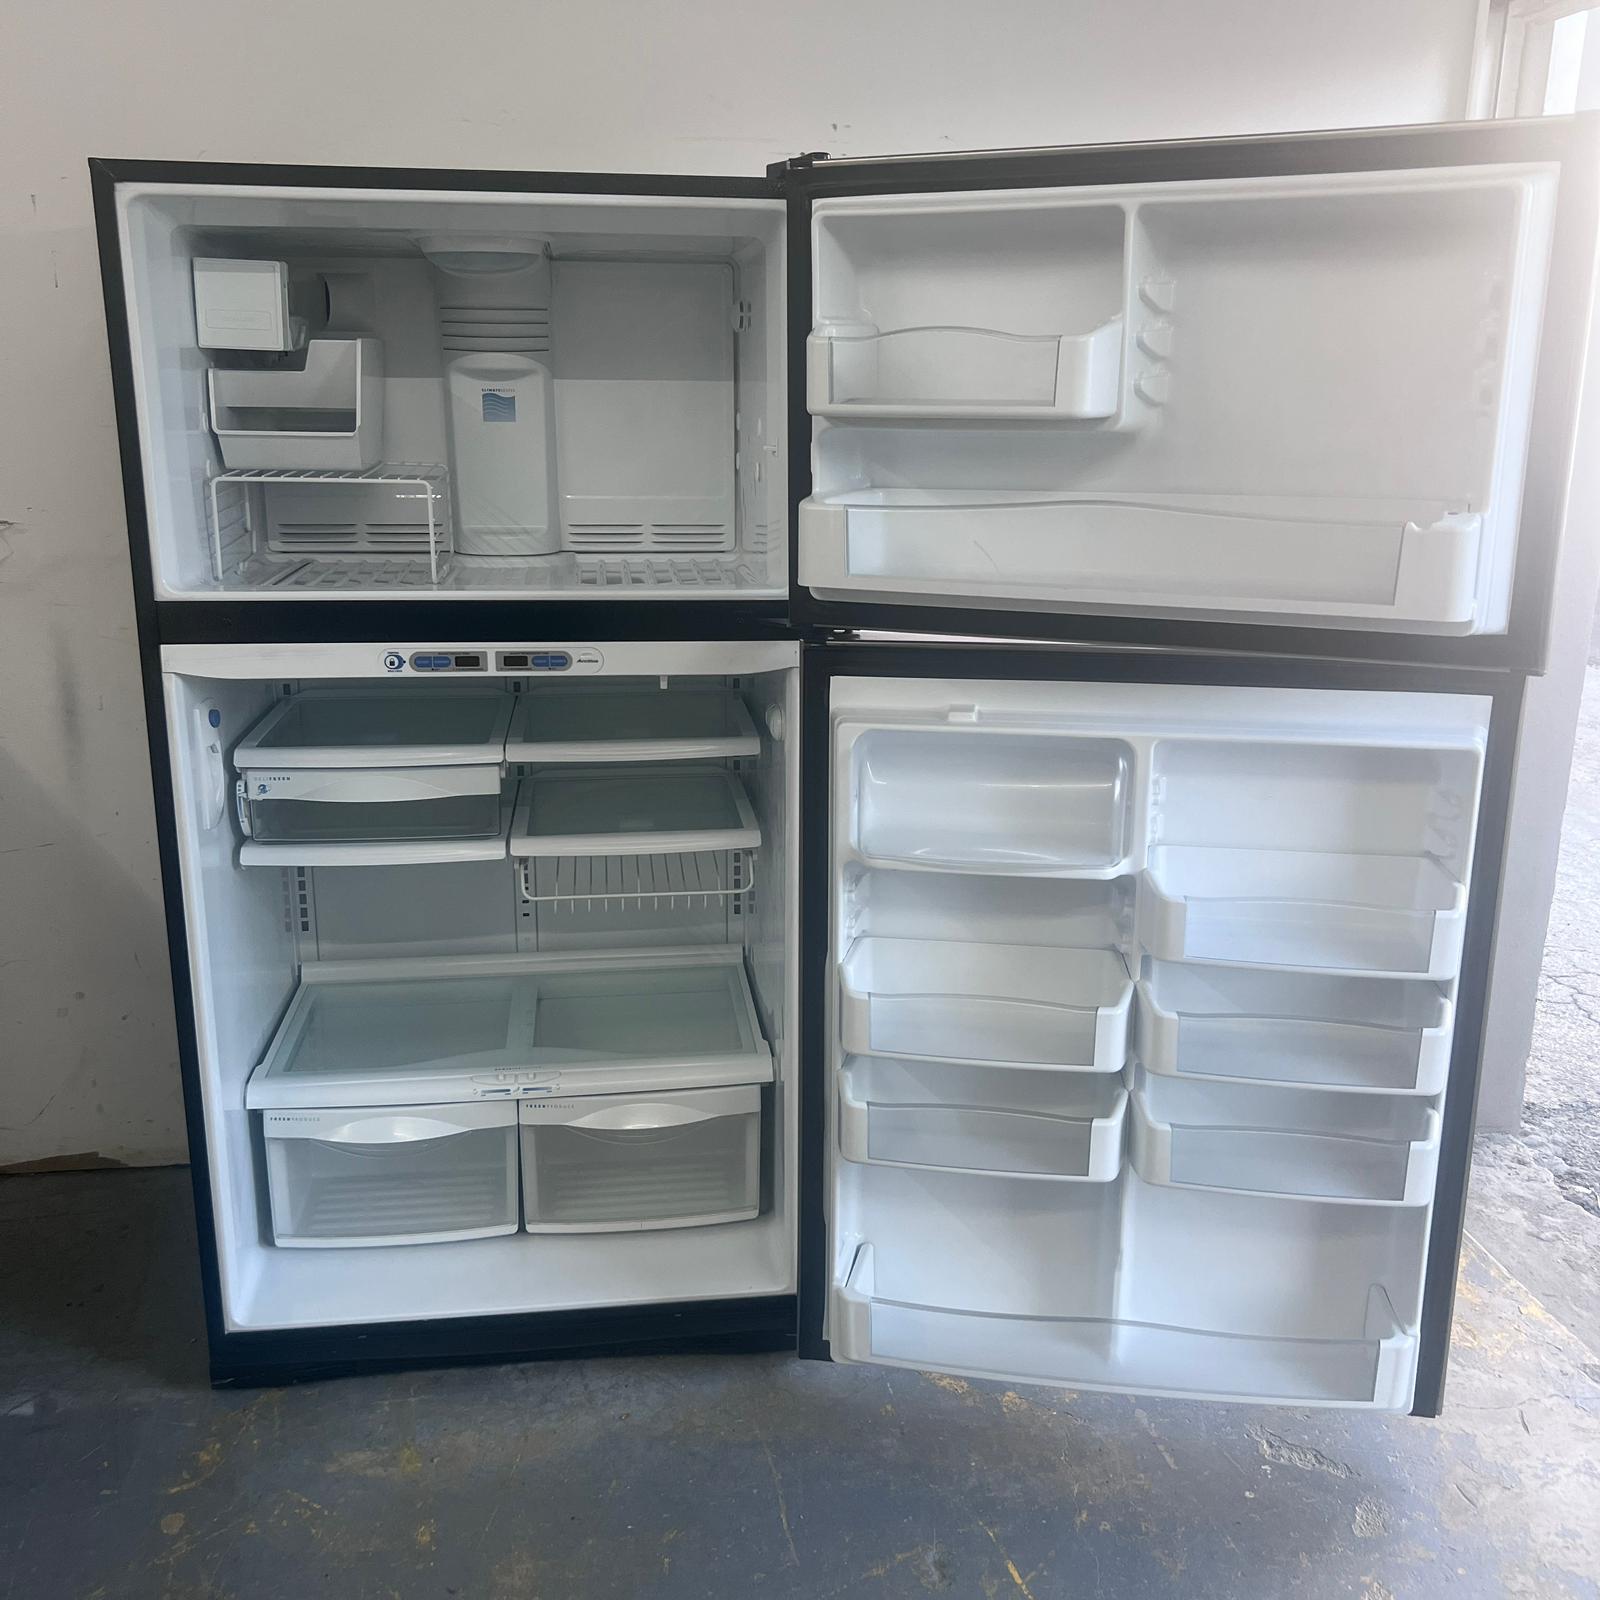 GE Profile Stainless Steel Top and Bottom Refrigerator